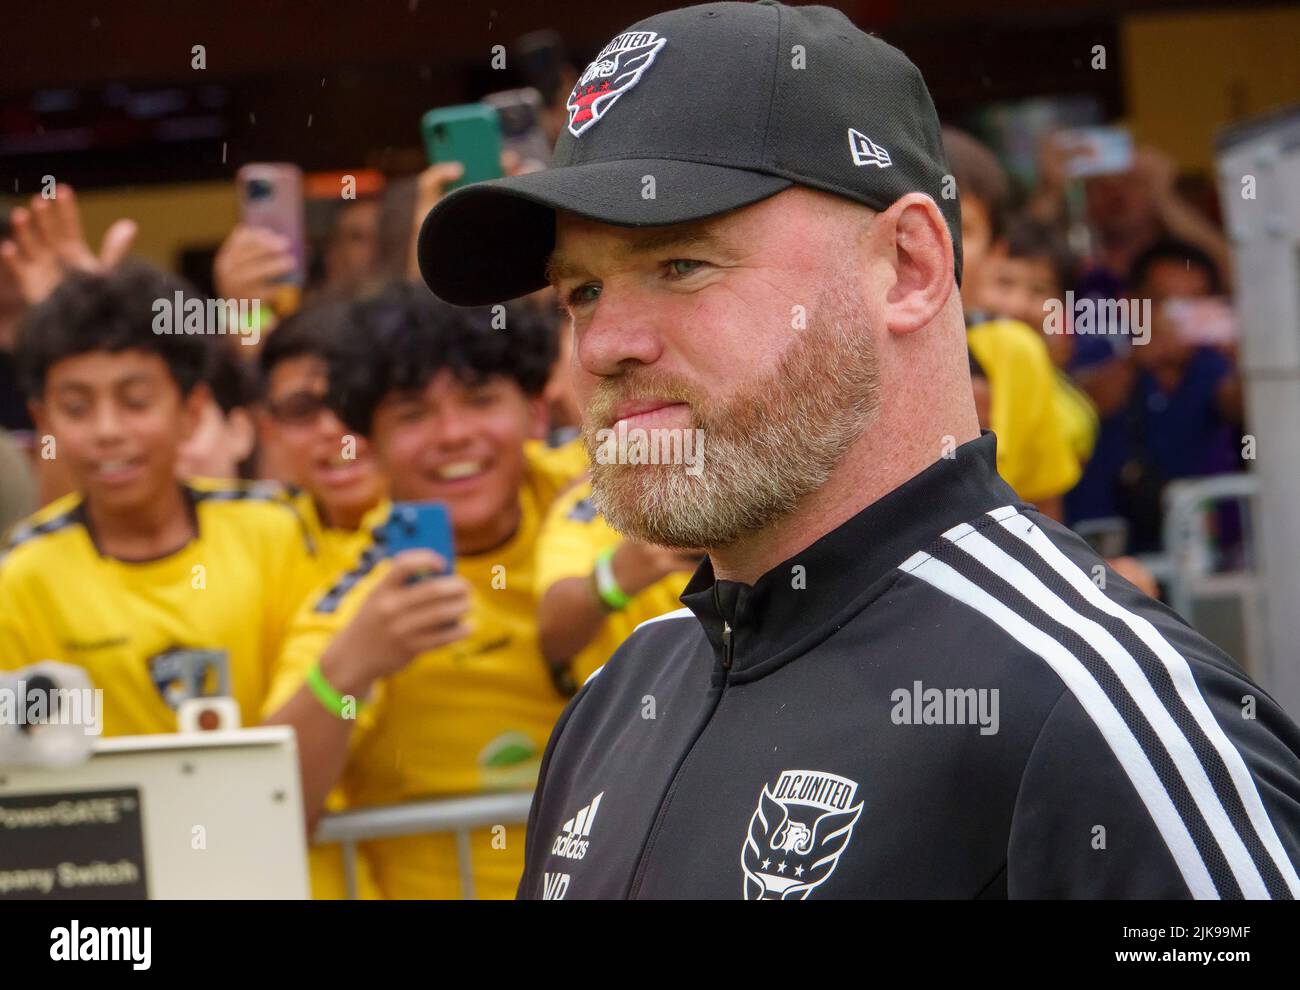 WASHINGTON, DC, USA - 31 JULY 2022: Head coach Wayne Rooney enters the pitch before his first game as D.C United coach before a MLS match between D.C United and the Orlando City SC, on July 31, 2022, at Audi Field, in Washington, DC. (Photo by Tony Quinn-Alamy Live News) Stock Photo